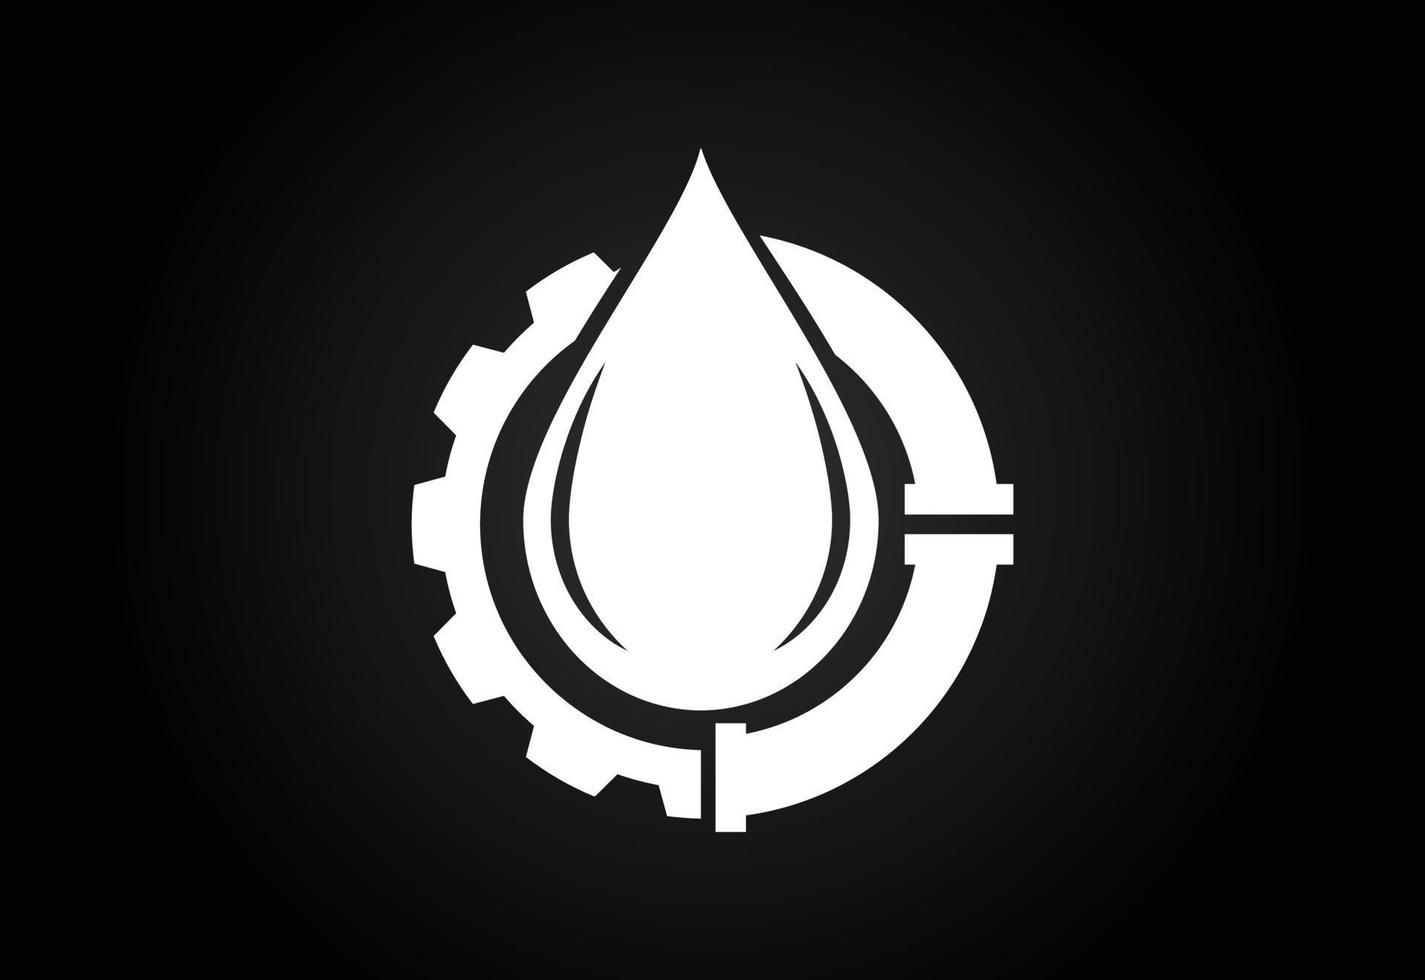 Fire flame icon in a shape of drop. Oil and gas industry logo design concept. vector